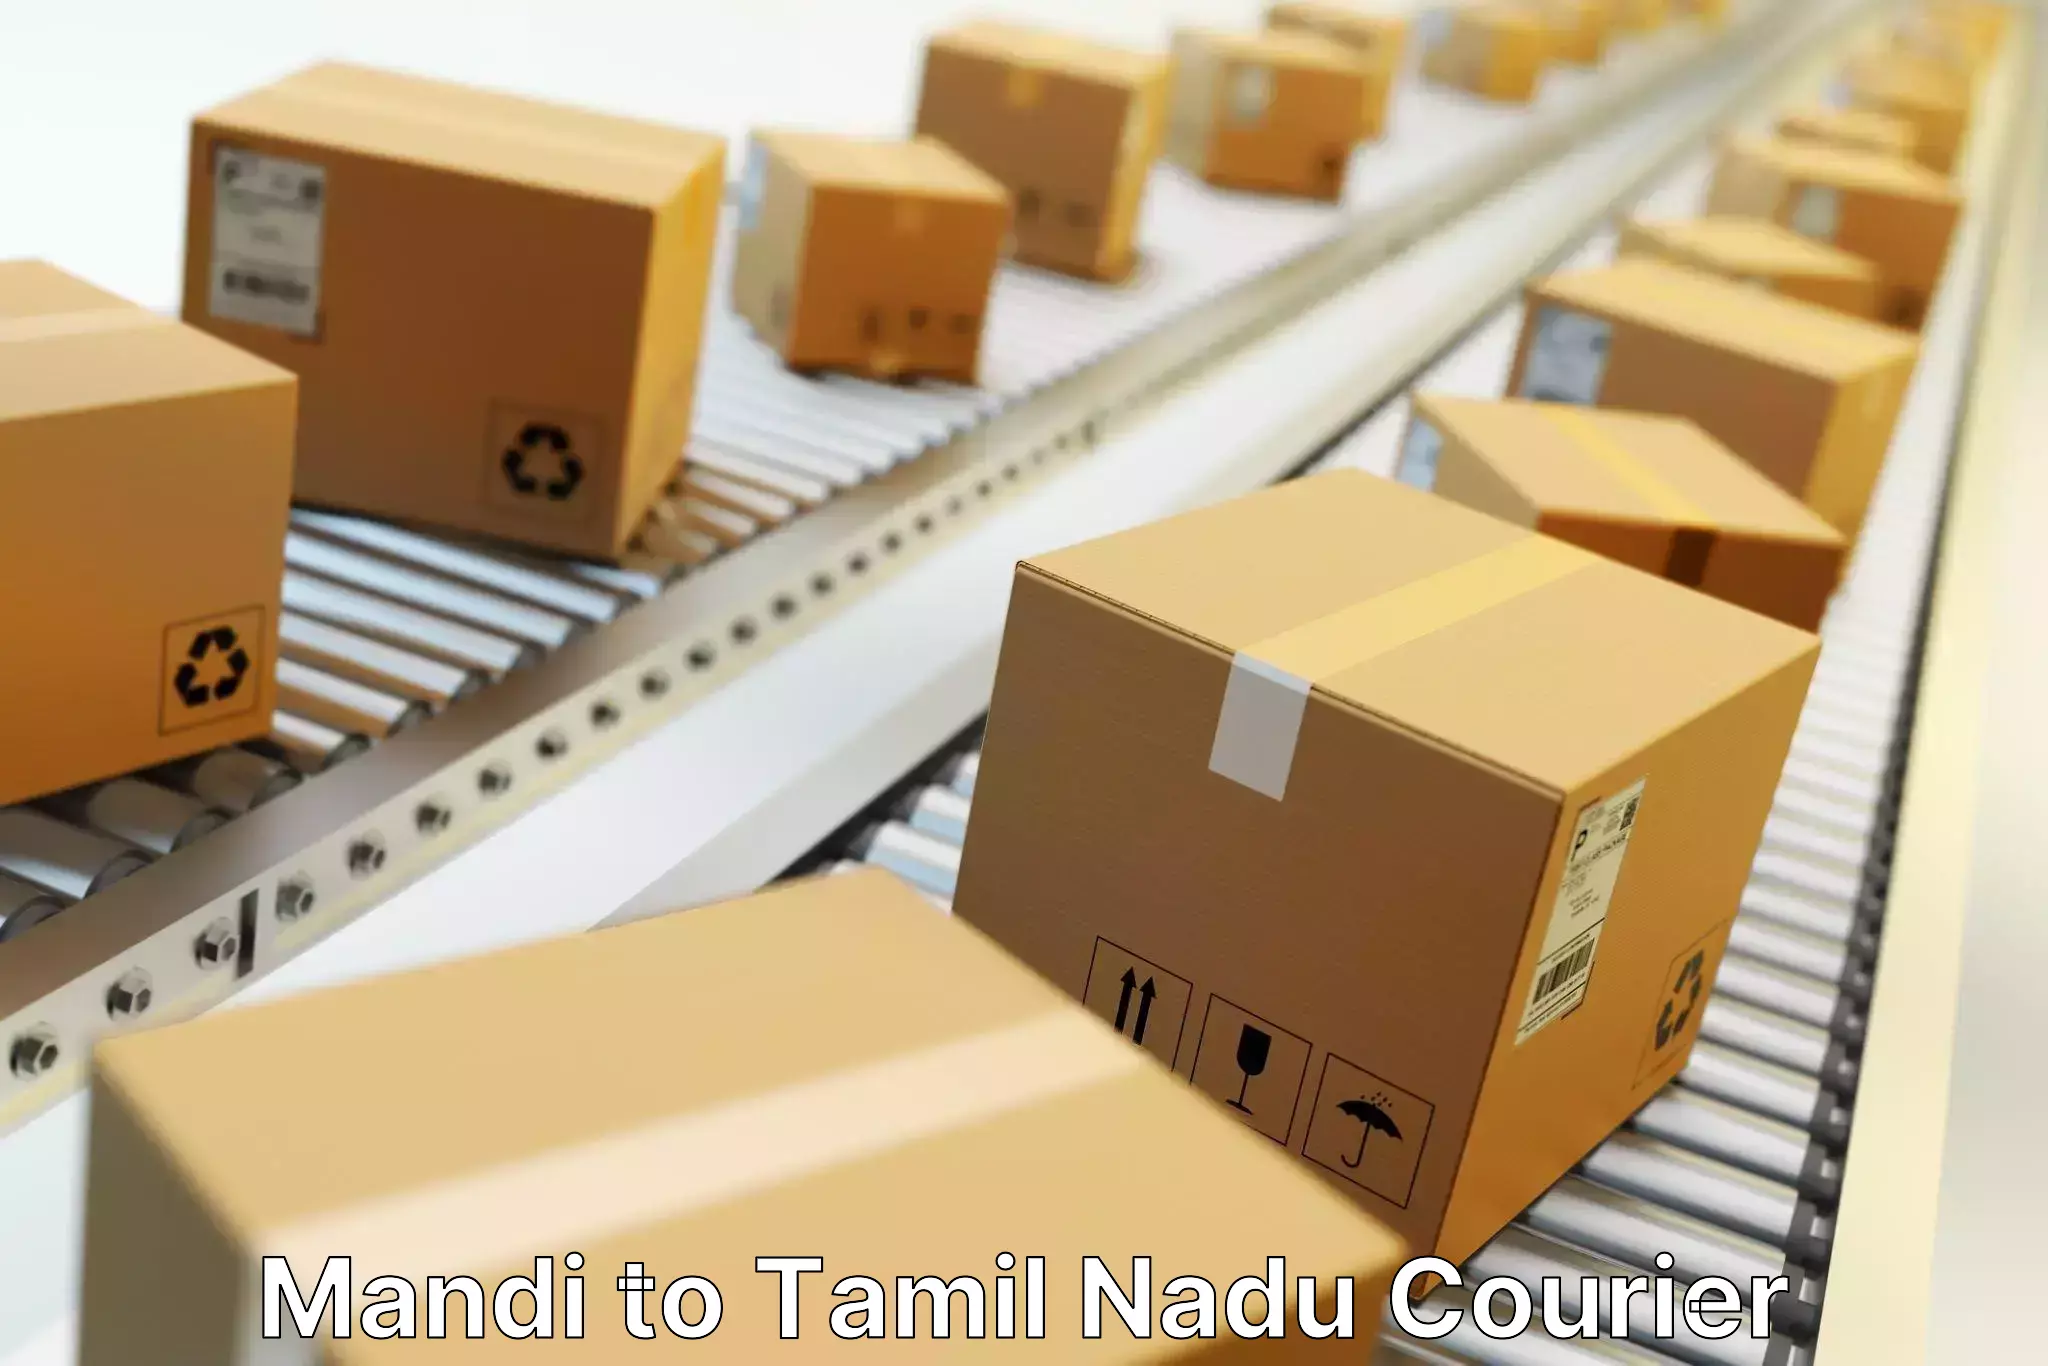 Flexible delivery scheduling in Mandi to University of Madras Chennai